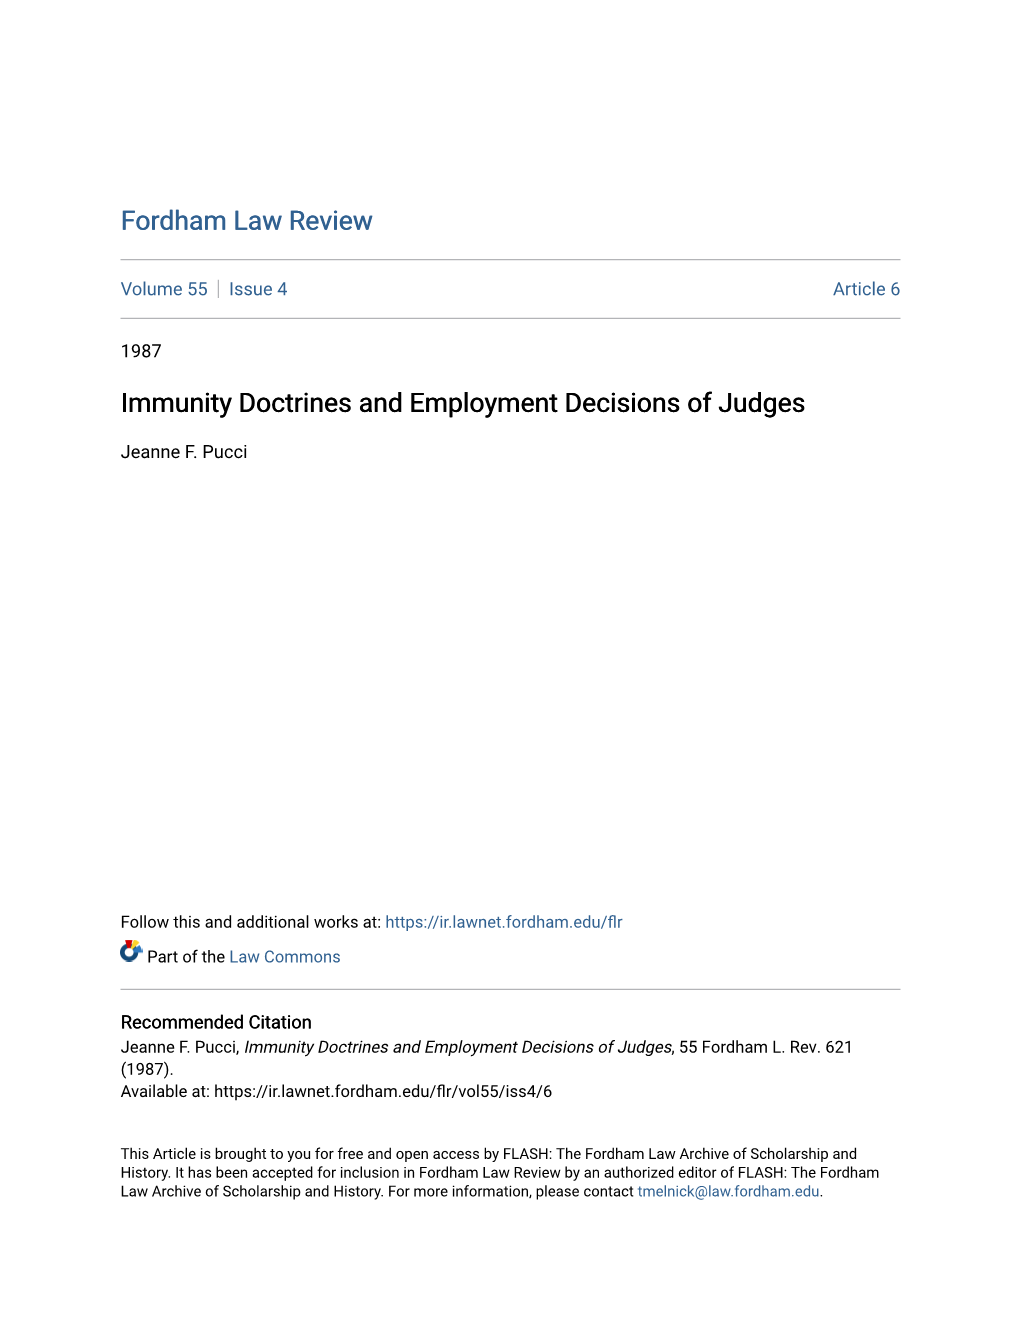 Immunity Doctrines and Employment Decisions of Judges